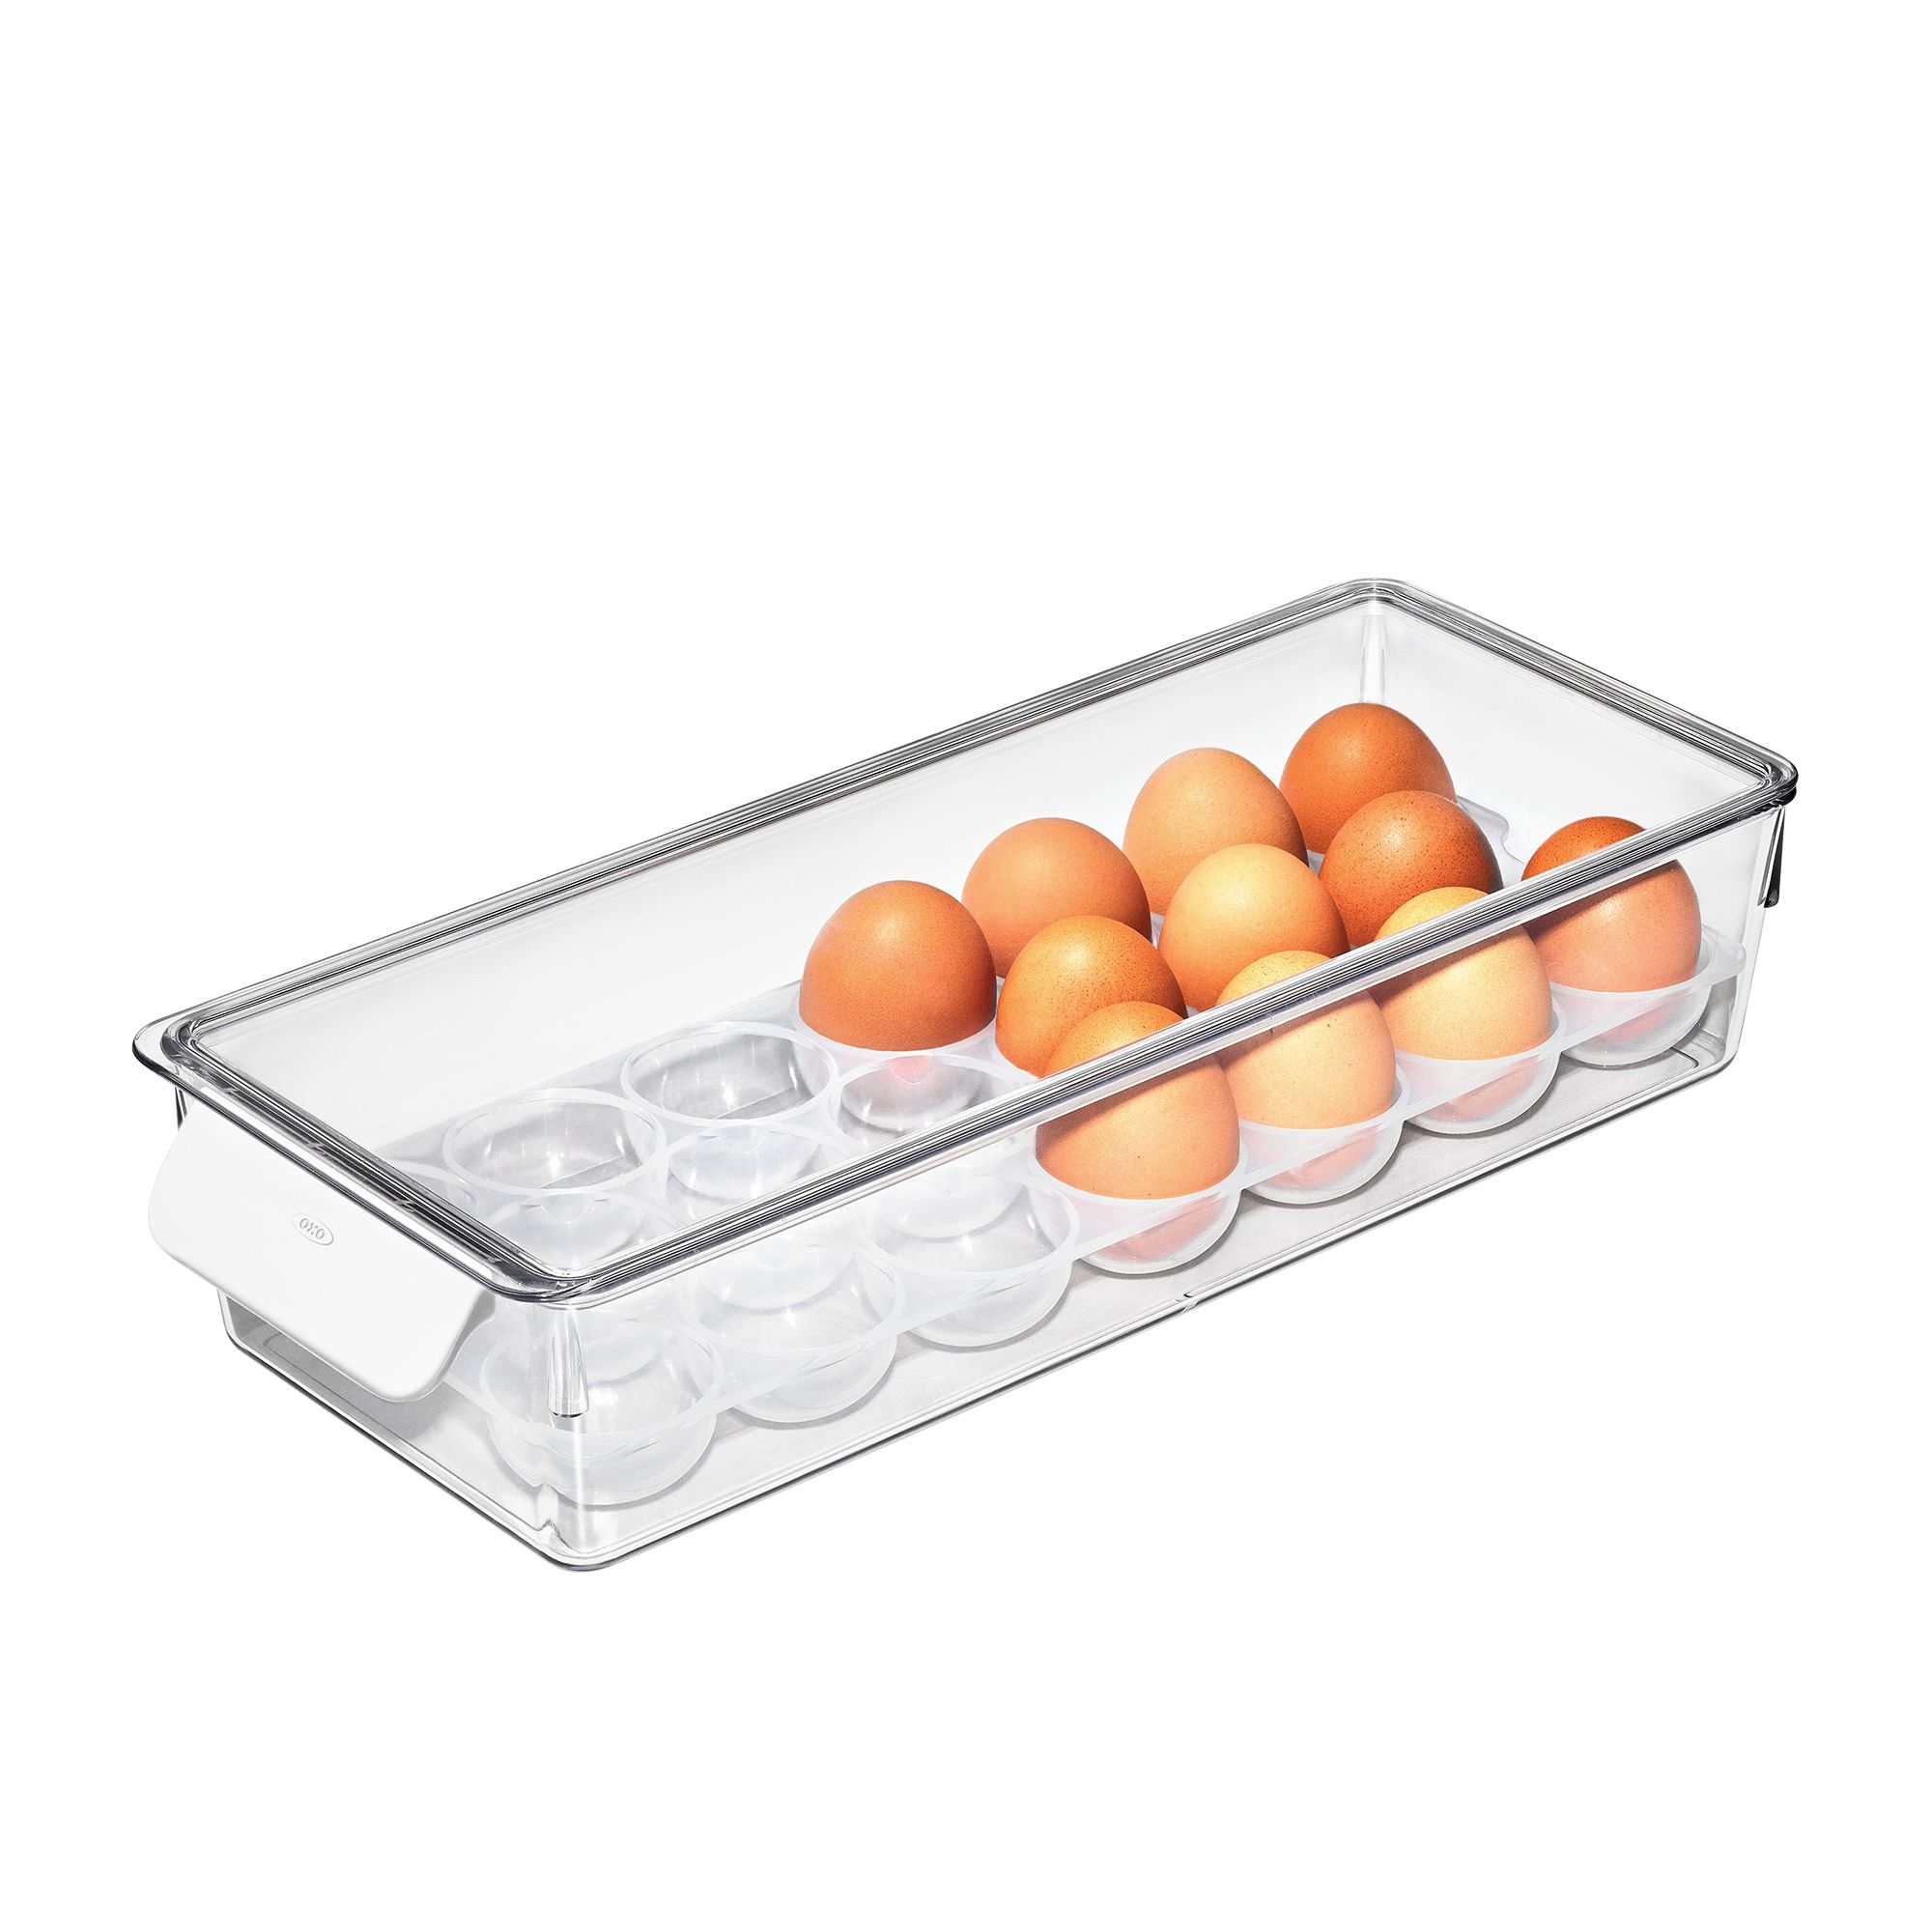 OXO Good Grips Fridge Egg Bin with Removable Tray Clear Image 1